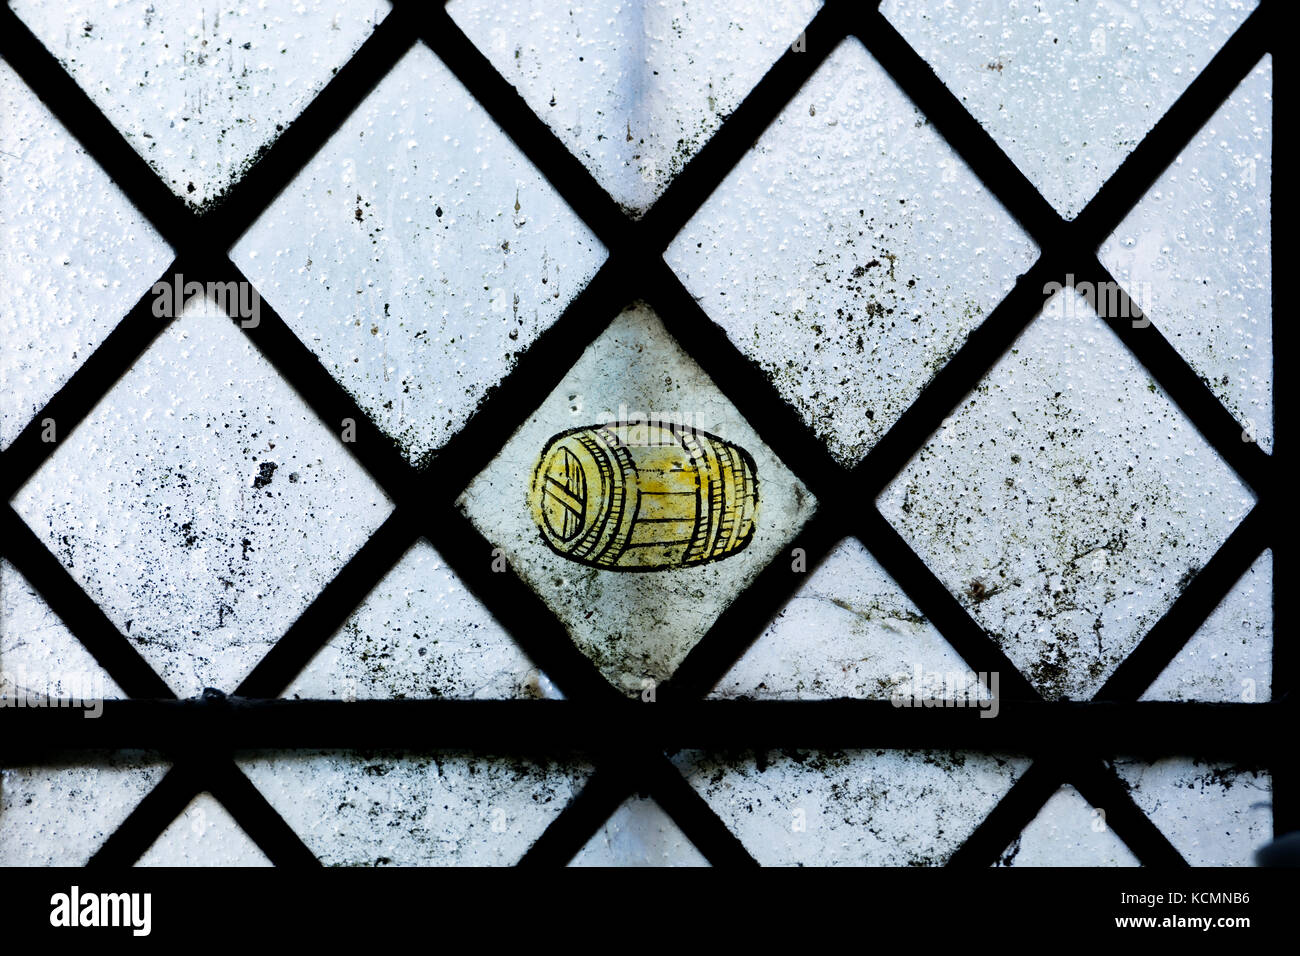 Medieval stained glass of a barrel, St. Wilfrid`s Church, North Muskham, Nottinghamshire, England, UK Stock Photo